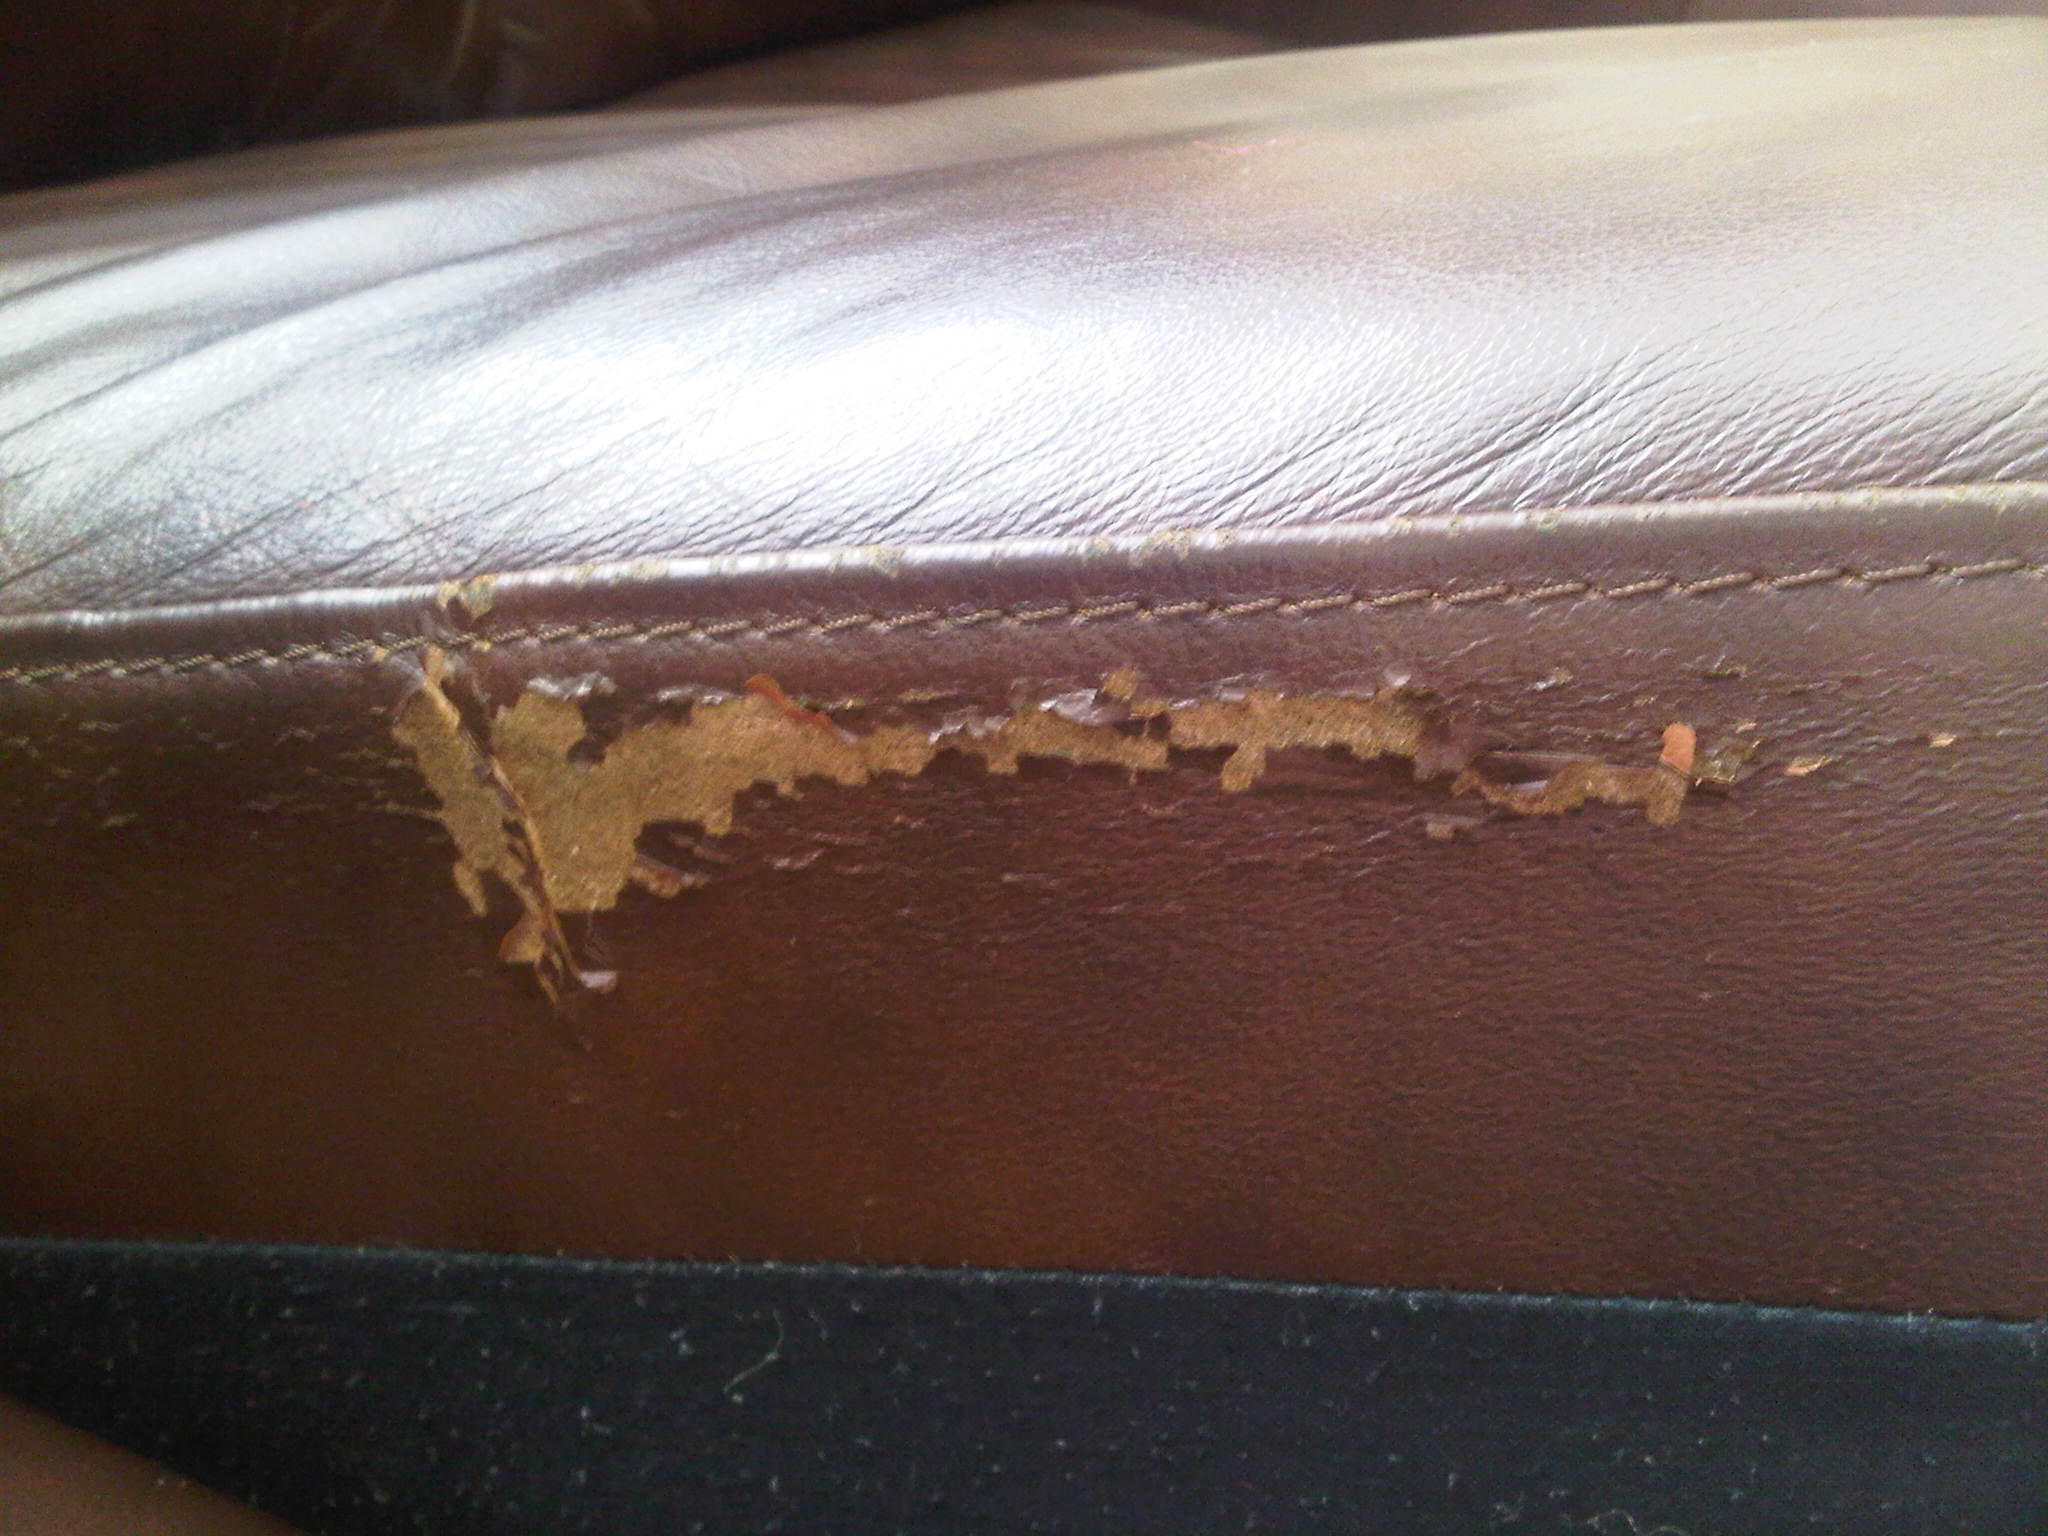 leather couch repair near me